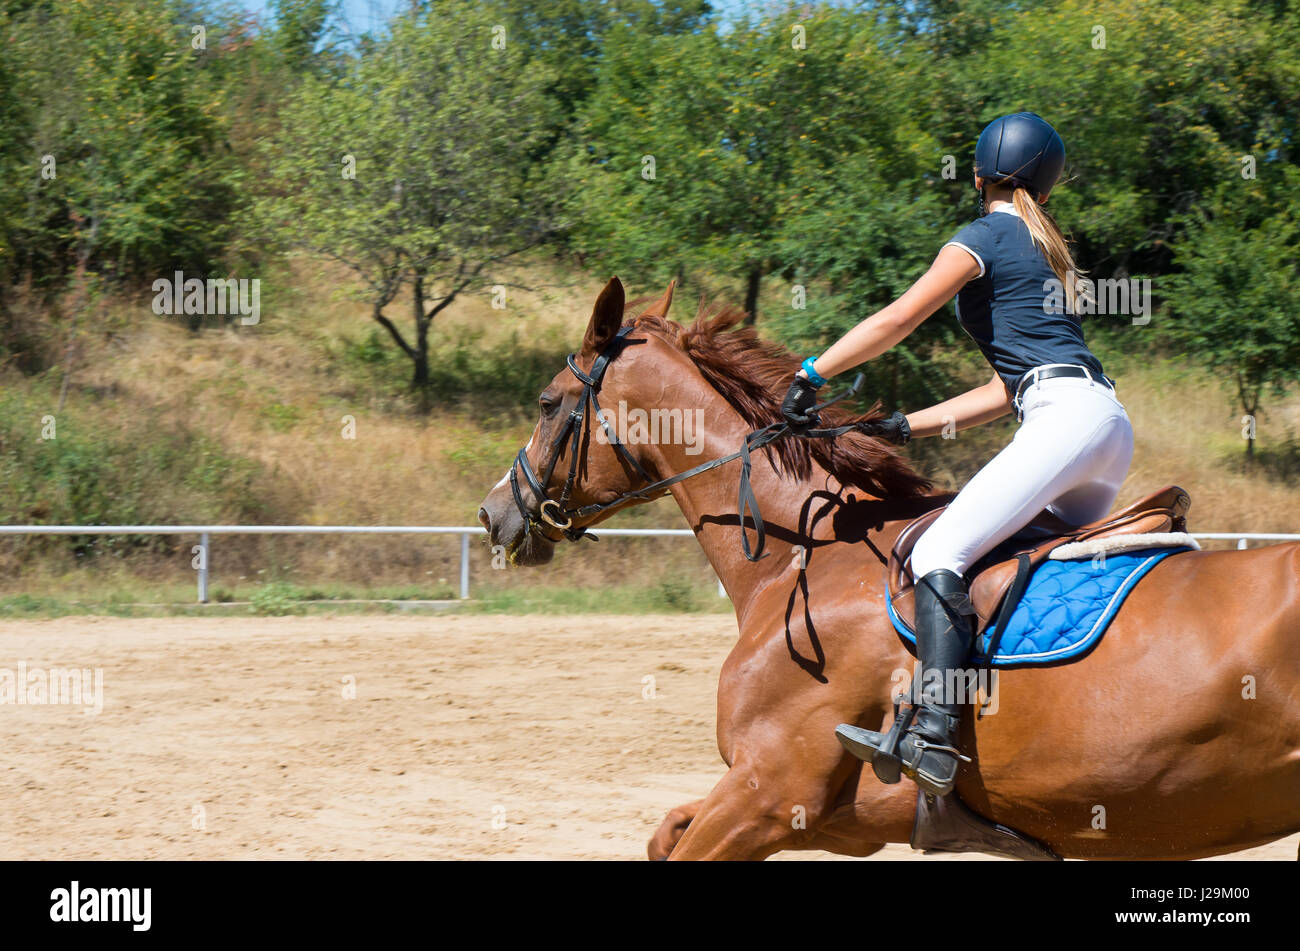 Entertainment with horseback riding. Horse ride at leisure Stock Photo